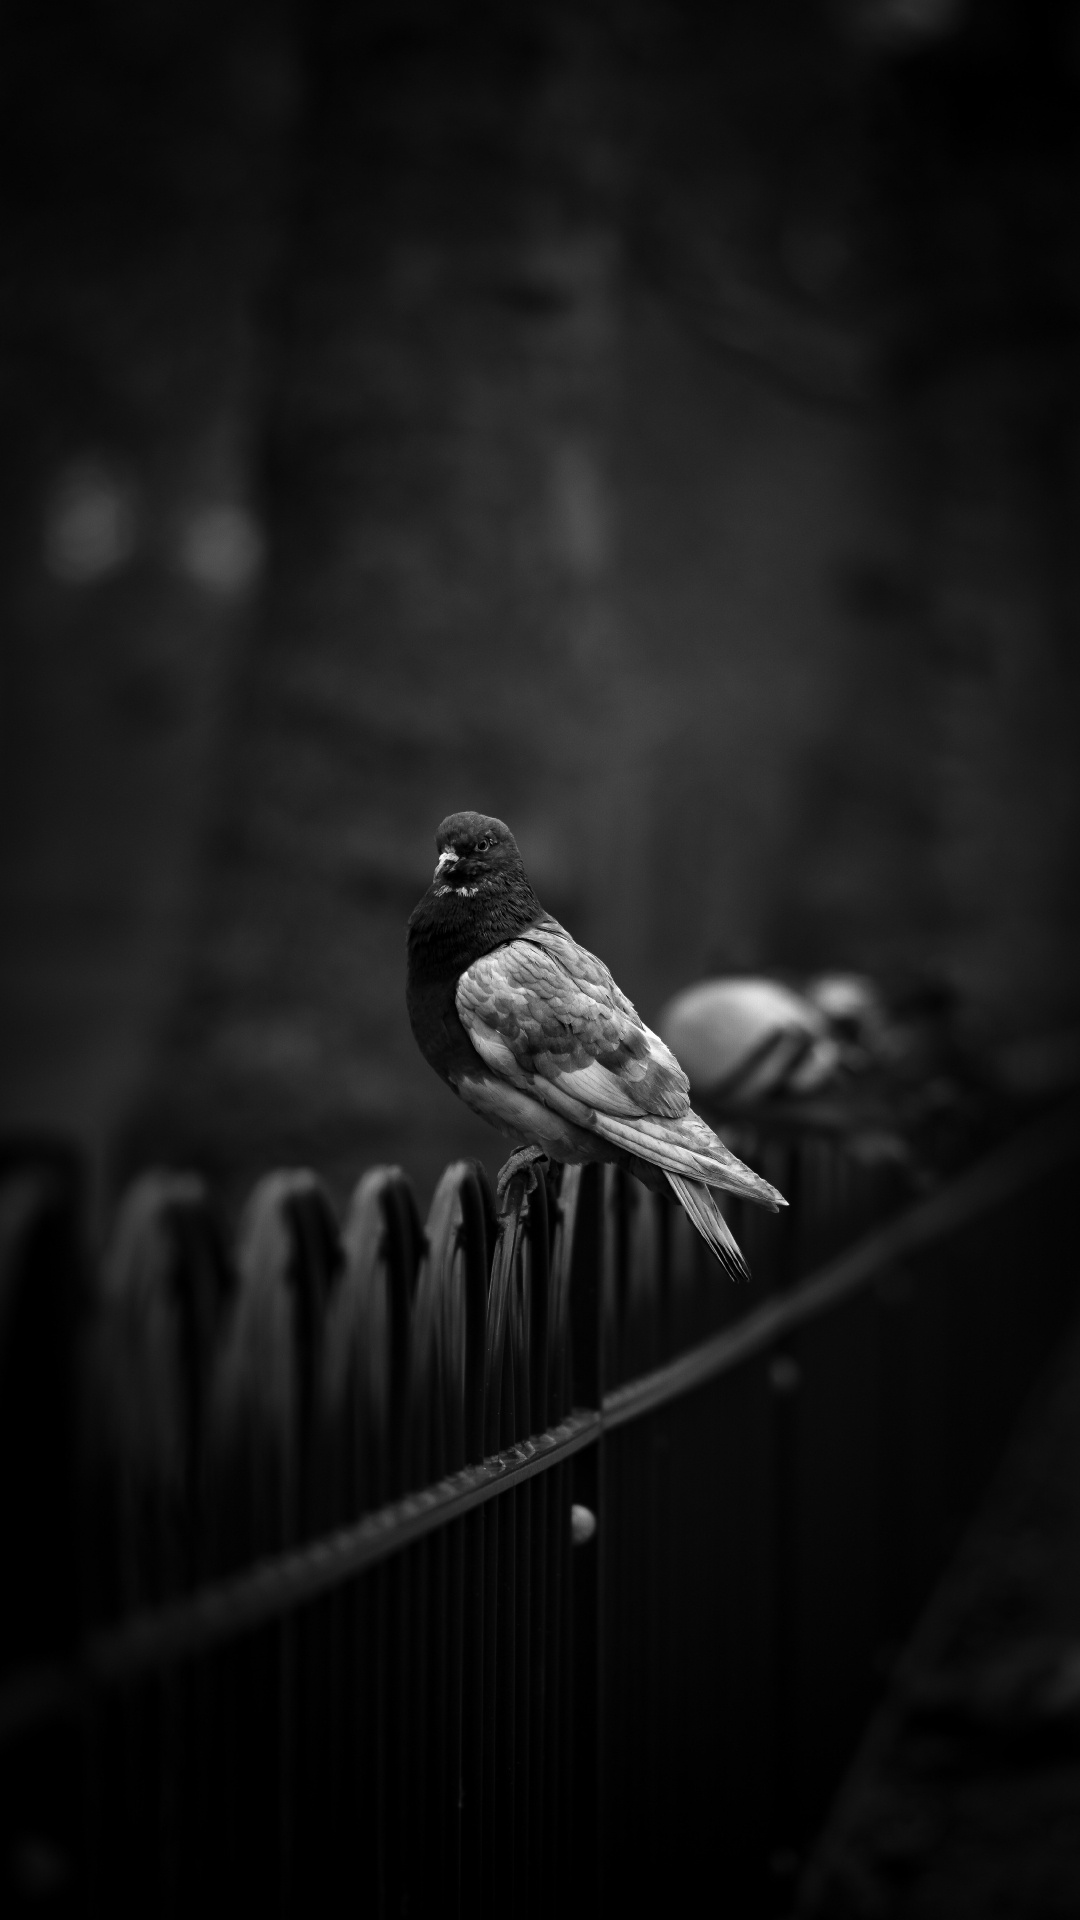 Grayscale Photo of a Bird on a Wooden Fence. Wallpaper in 1080x1920 Resolution